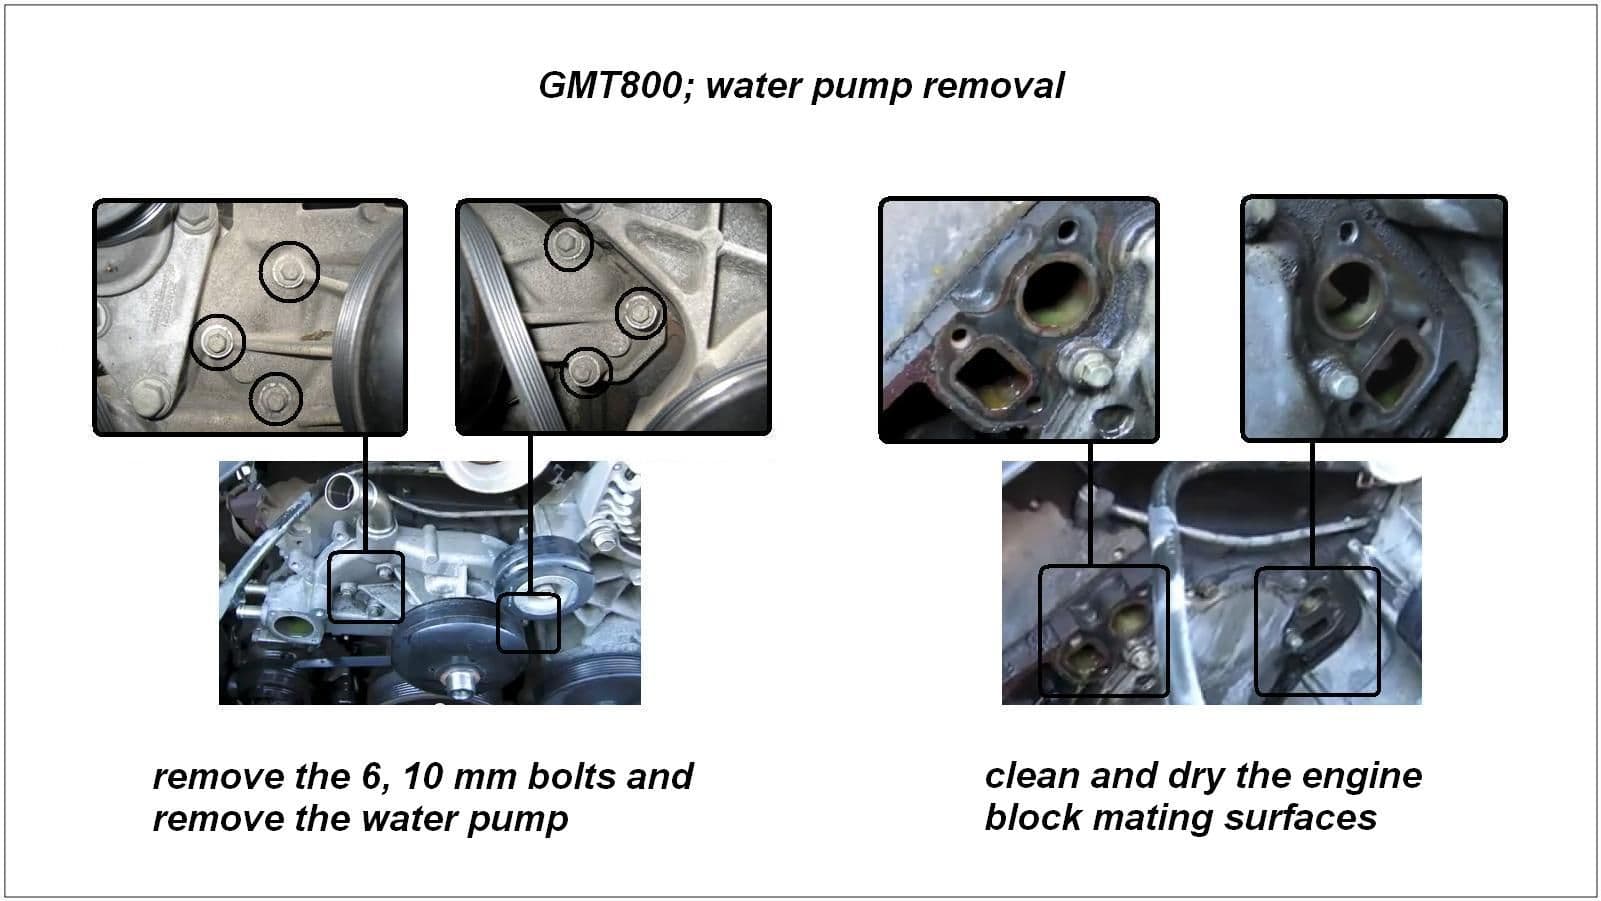 Chevrolet Silverado 1999-2006: How to Replace Water Pump